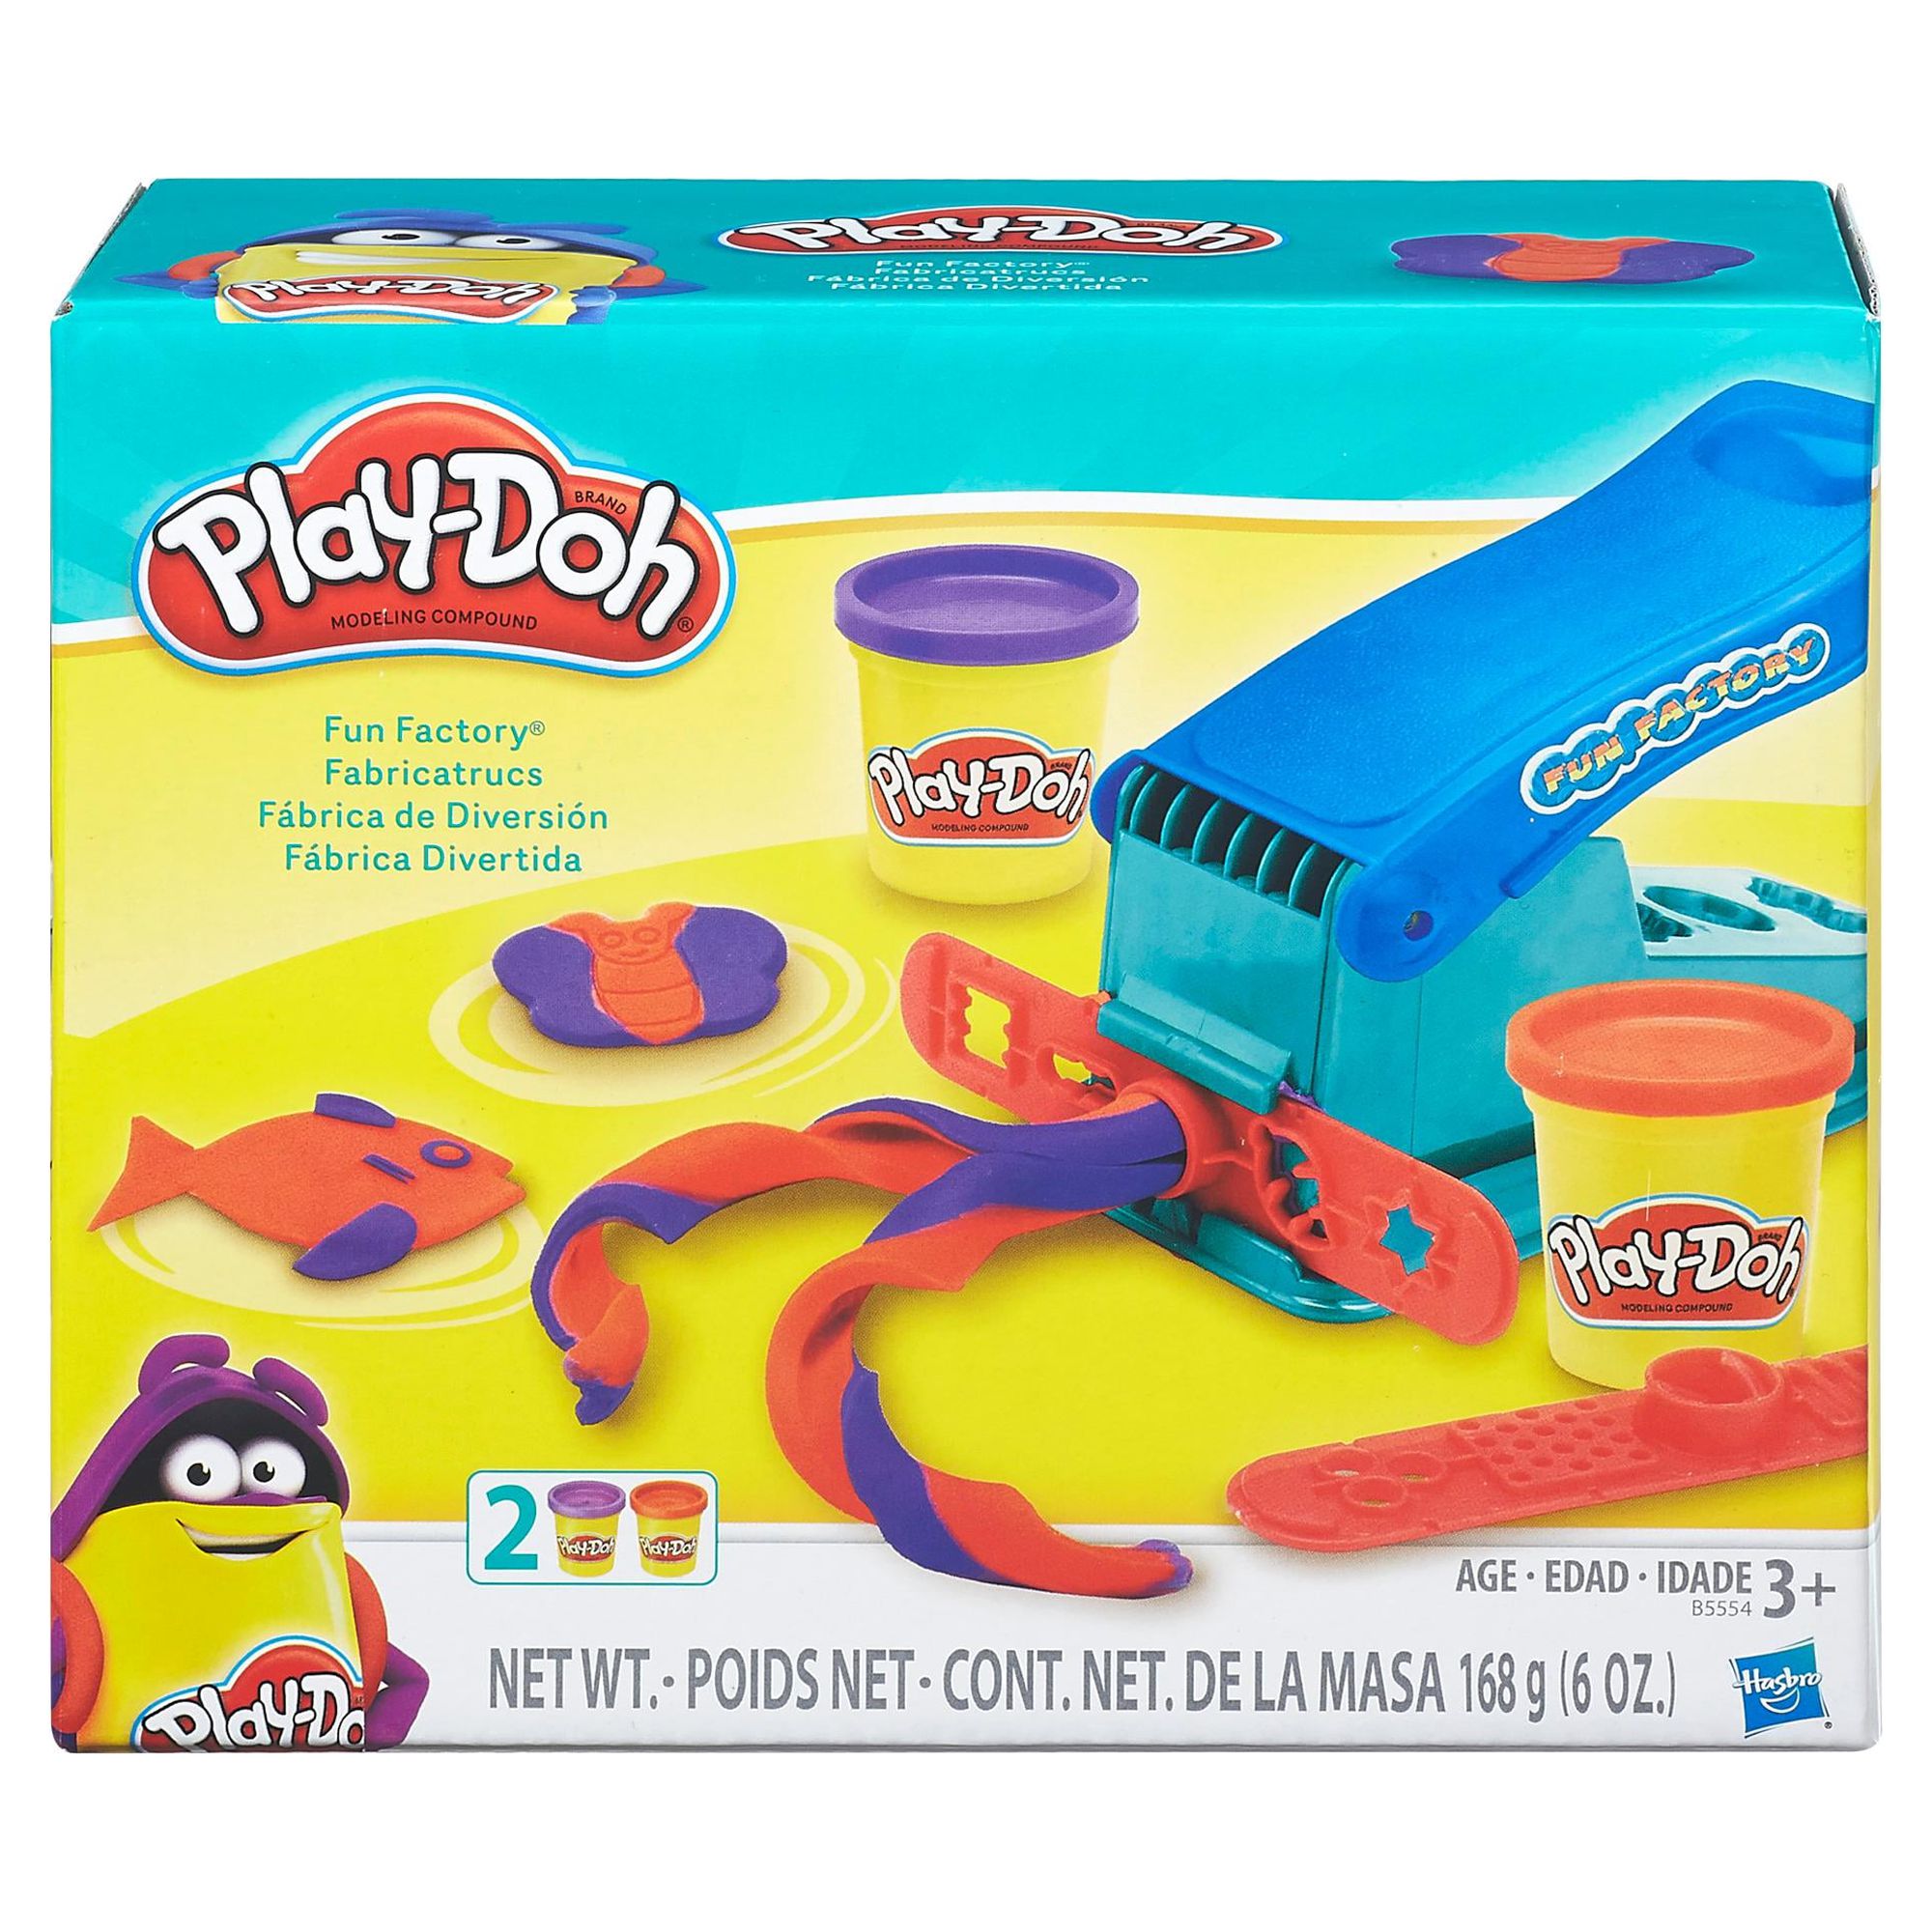 Play-Doh Fun Factory Set, Includes 2 Cans of Play-Doh - image 2 of 2